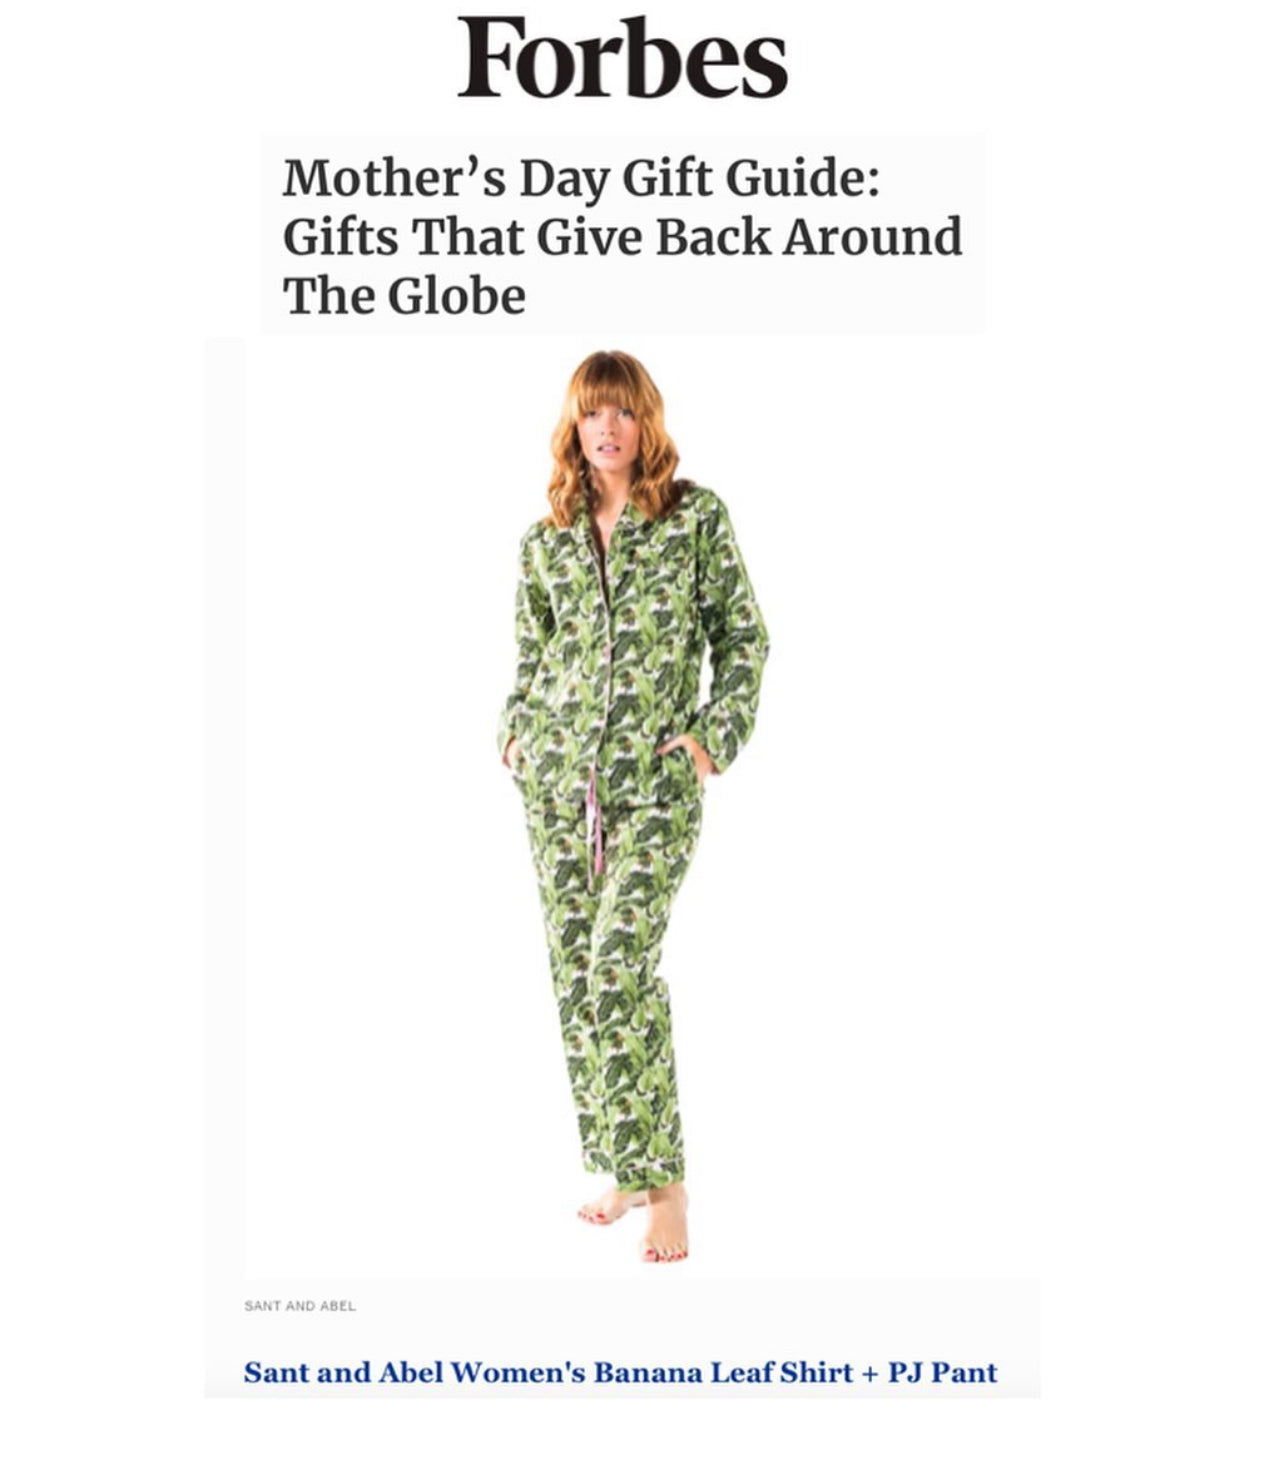 Forbes Mother's Day